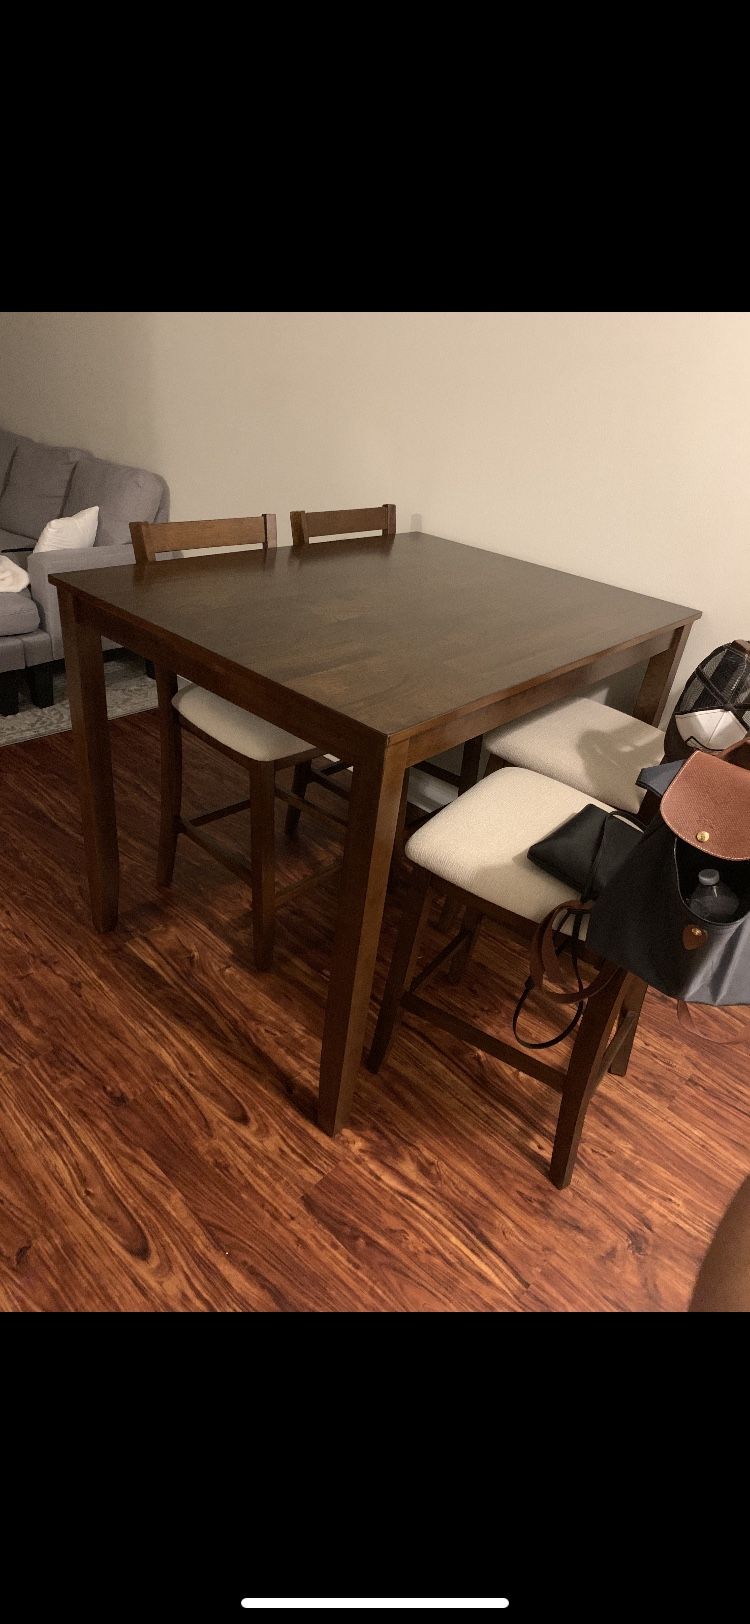 Wayfair Donegal Table 4 Seat (negotiable)